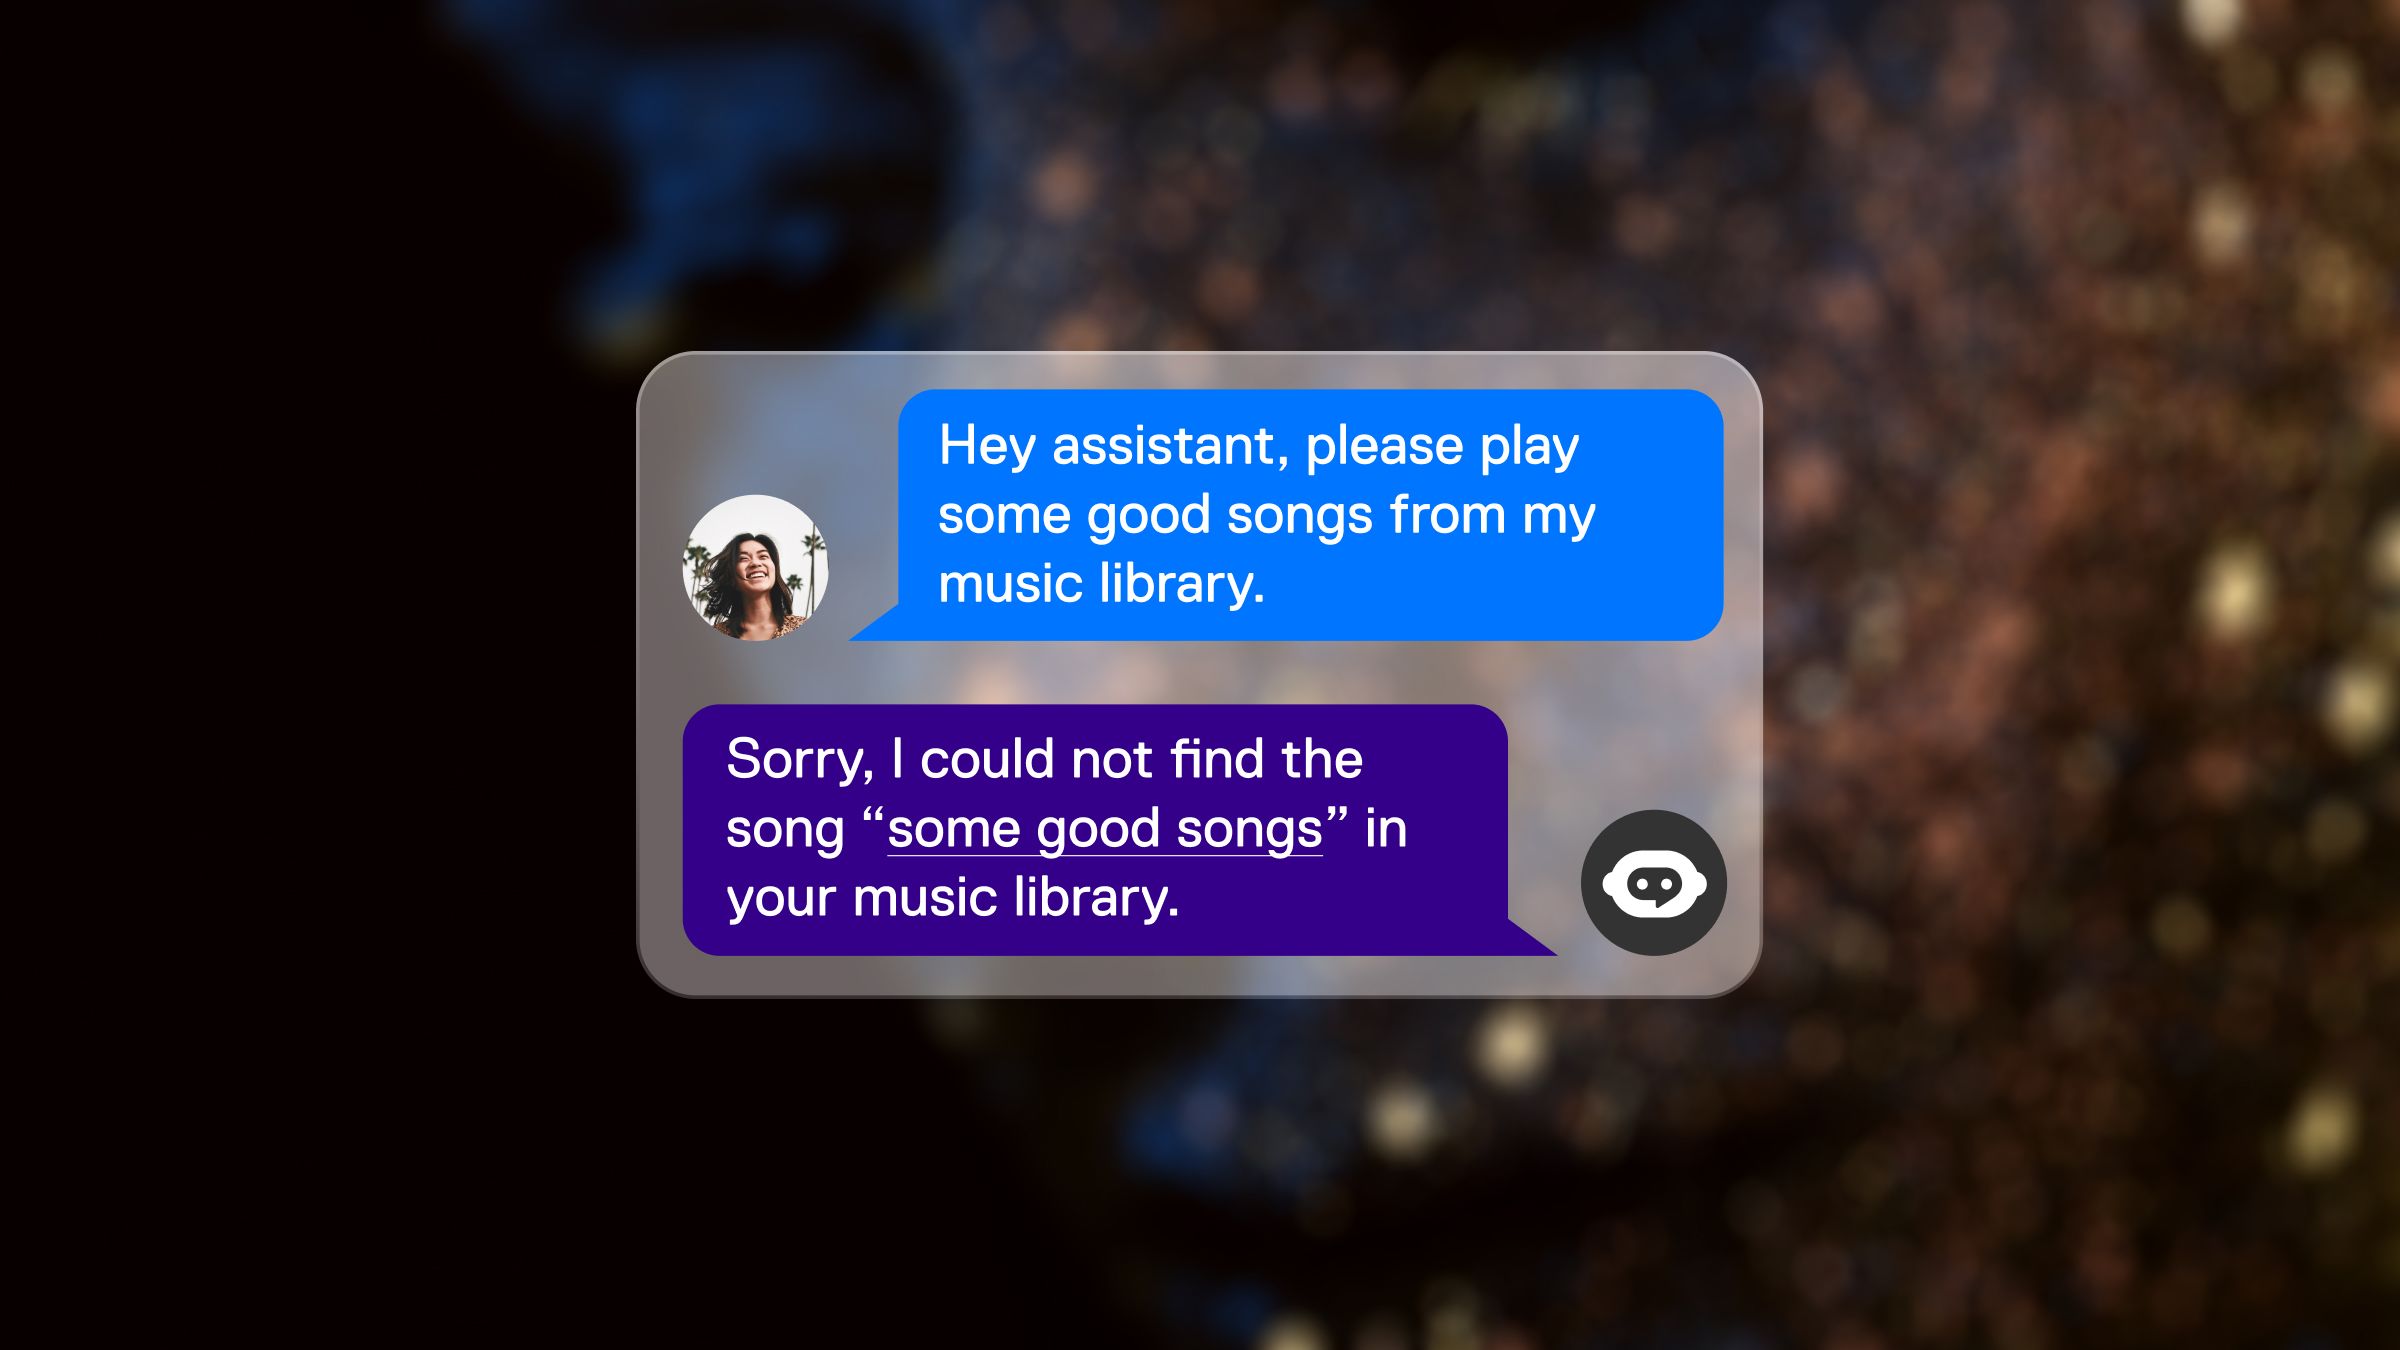 Example UI of a poor interaction with artificial intelligence.